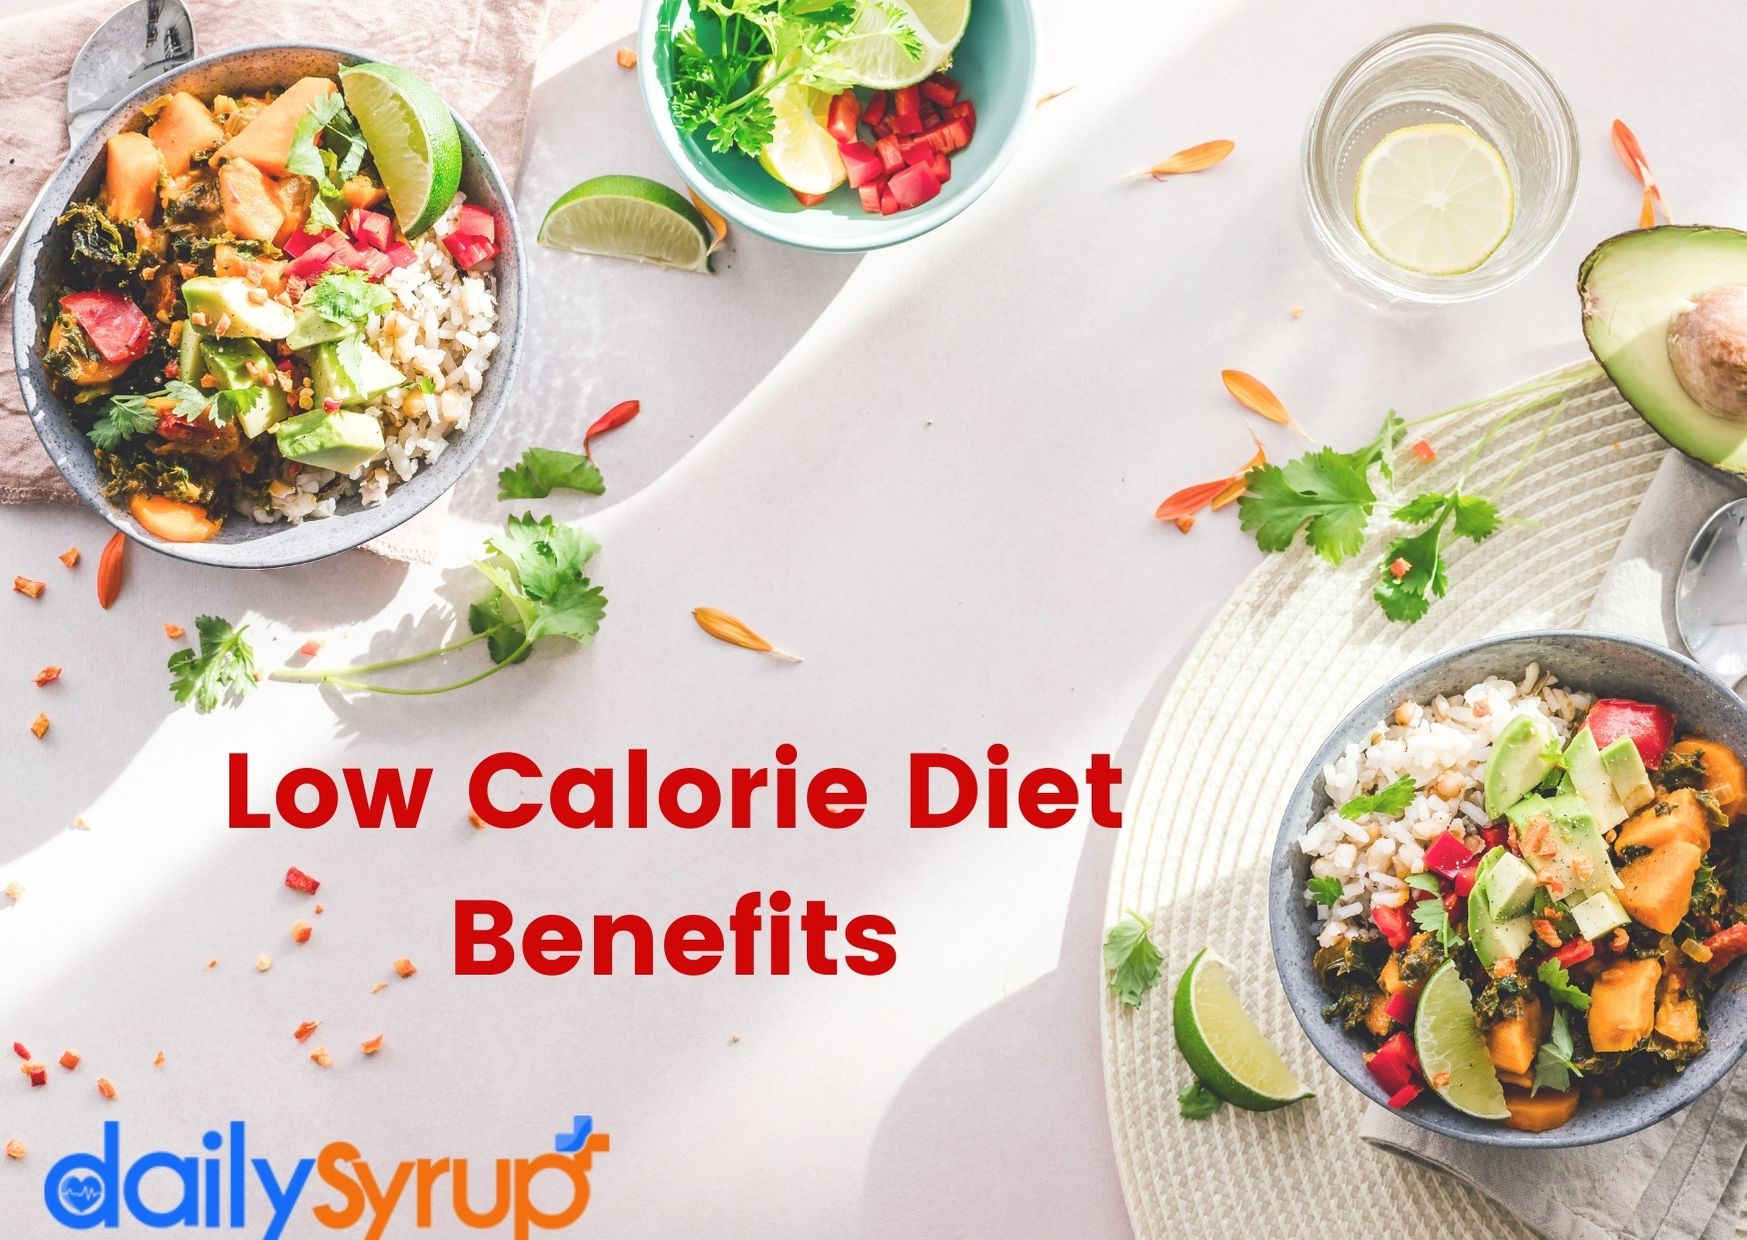 Low Calorie Diet Health Benefits (Dieting Research)